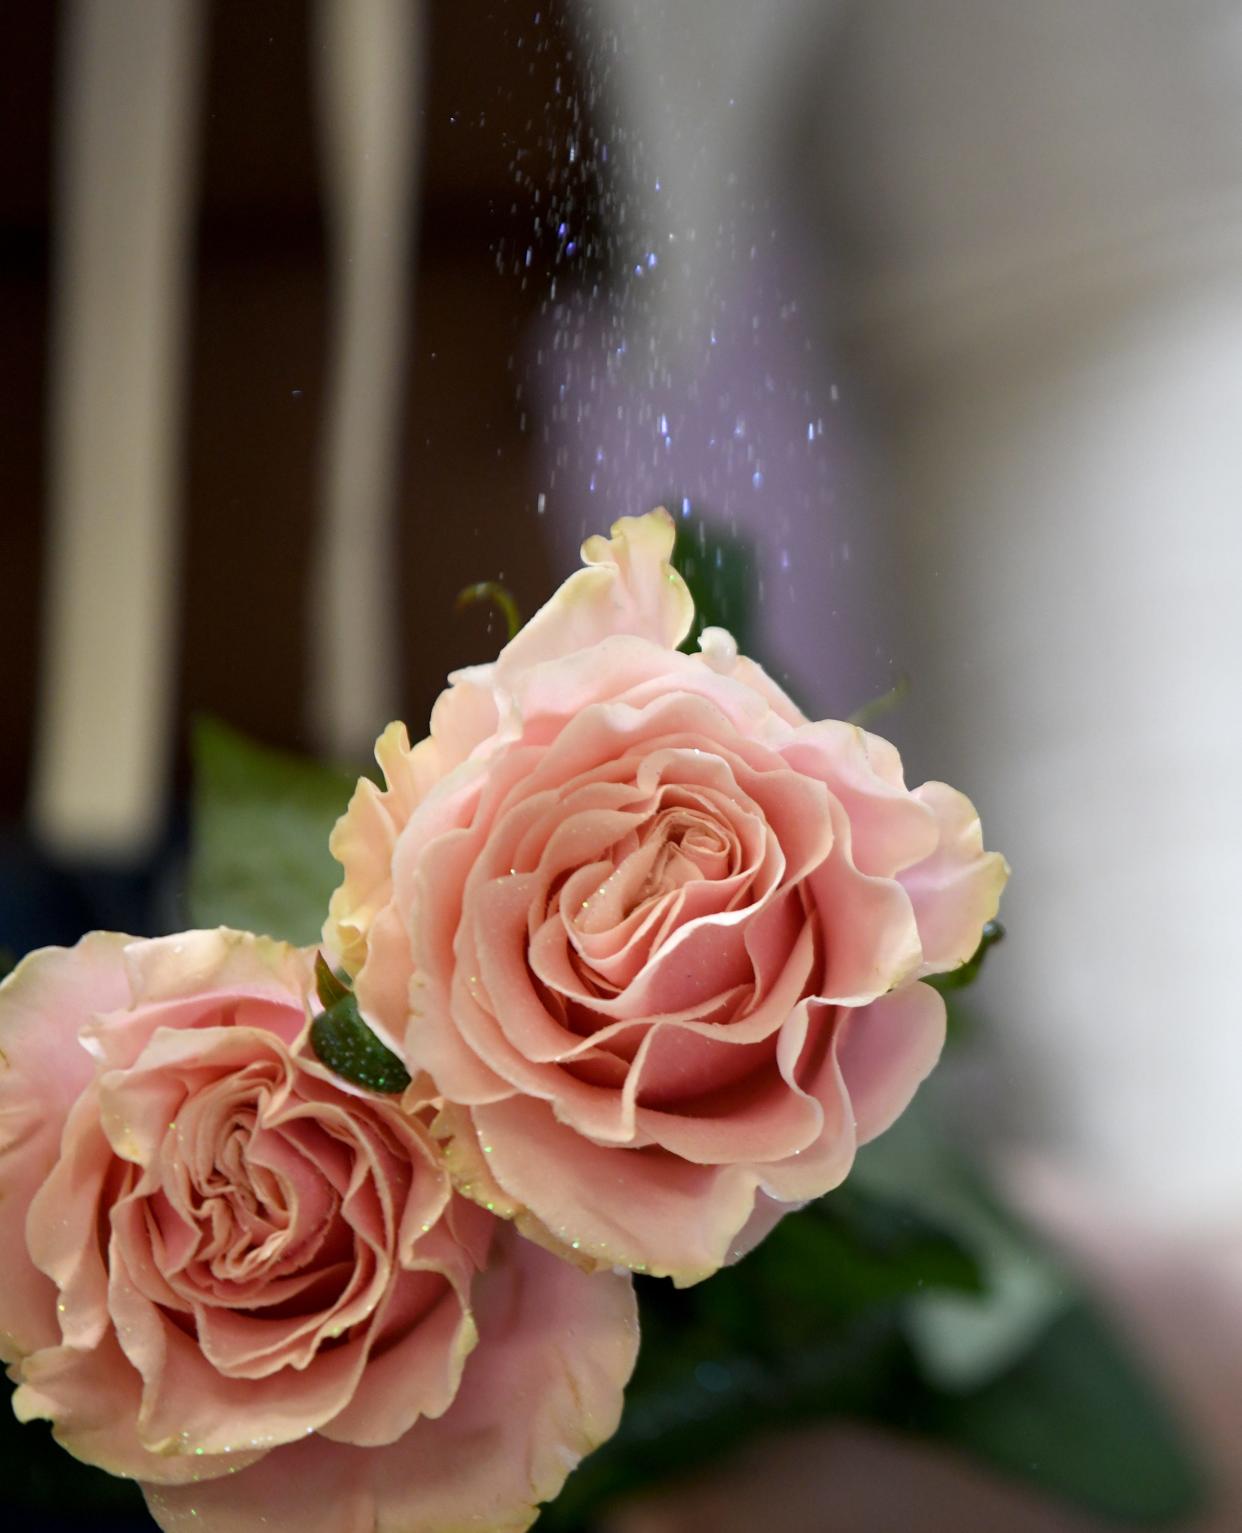 Roses at Botanica Florist in Belden Village in Jackson Township get a bit of sparkle with a sprinkle of glitter.